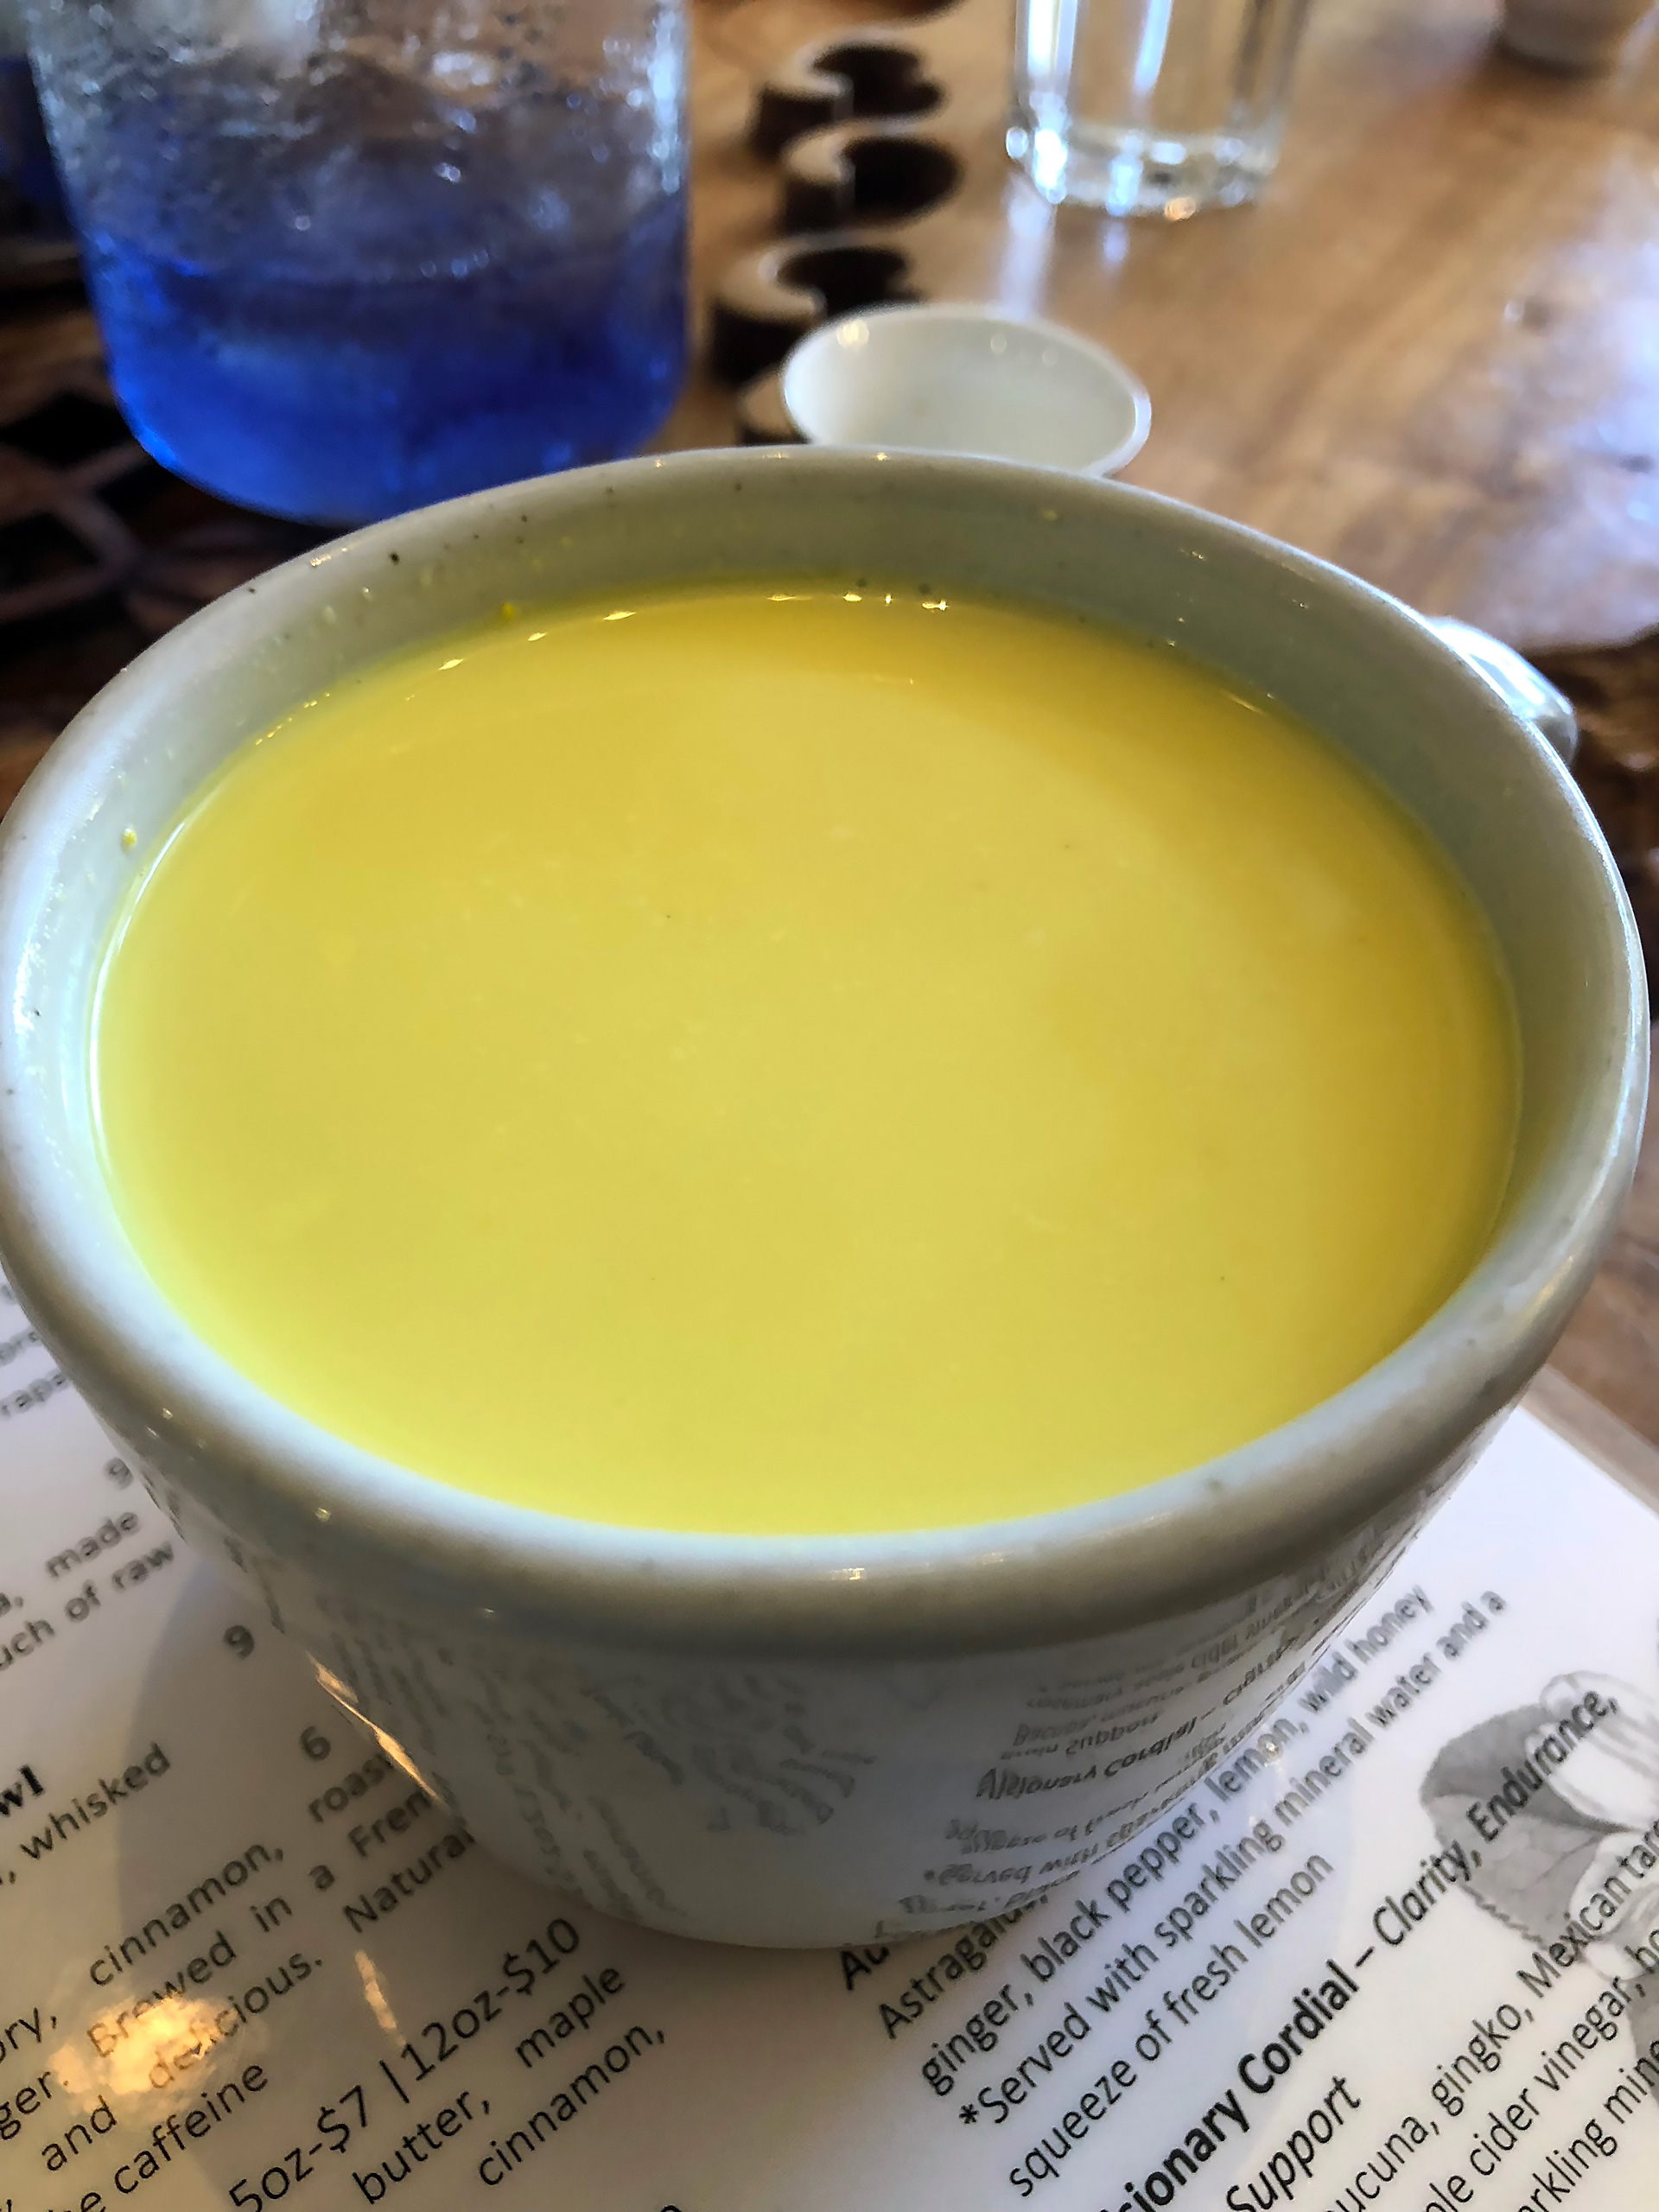 Golden Milk: A sultry blend of organic turmeric, ashwagandha, ginger, cardamom, clove, black pepper and vanilla in homemade nut milk with a touch of raw local honey.